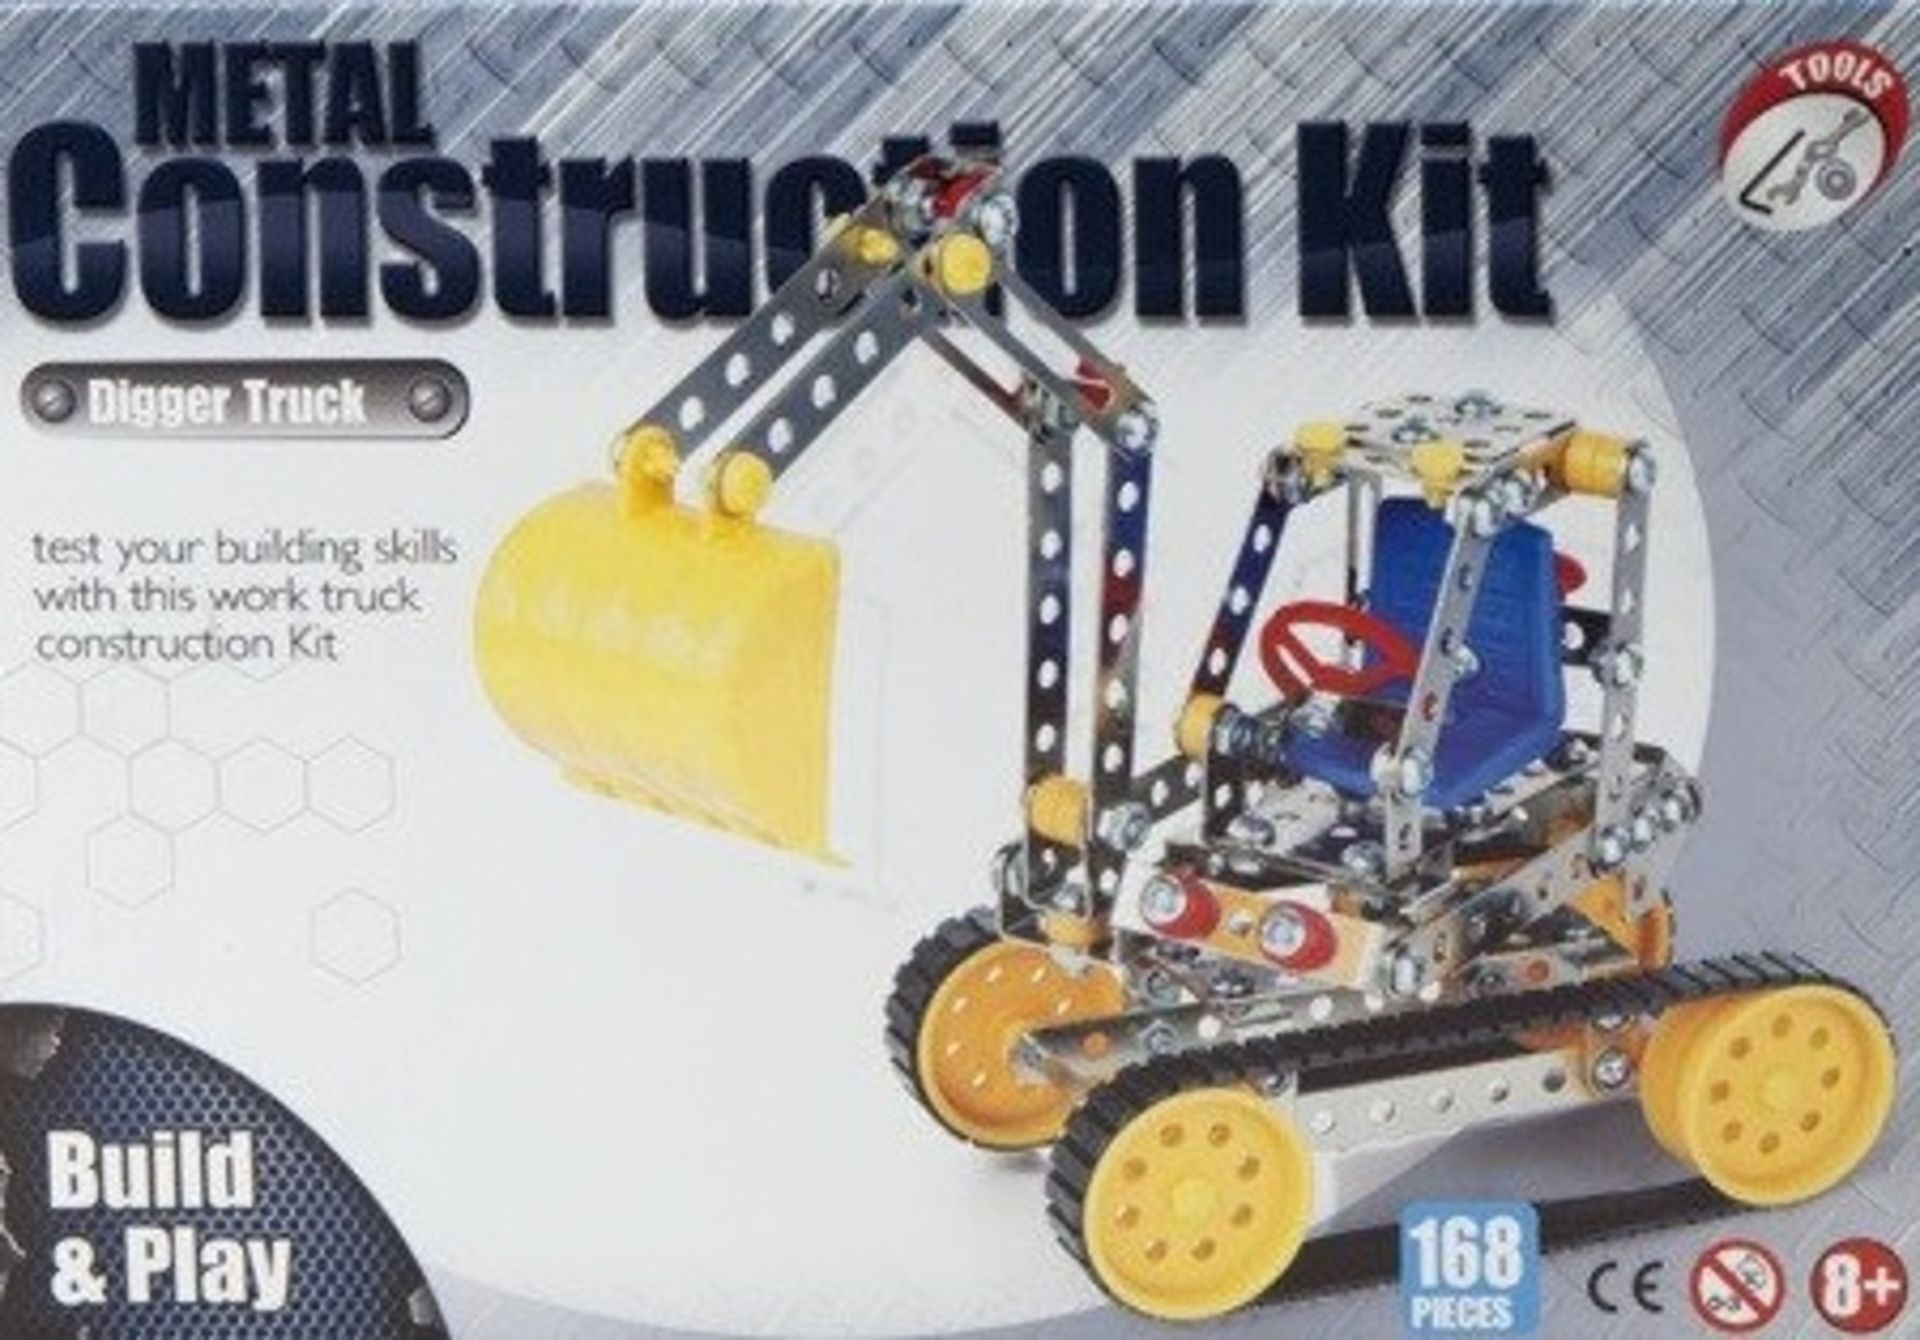 V *TRADE QTY* Brand New Metal Construction Kit Digger Truck With 168pcs and Tools X 5 YOUR BID PRICE